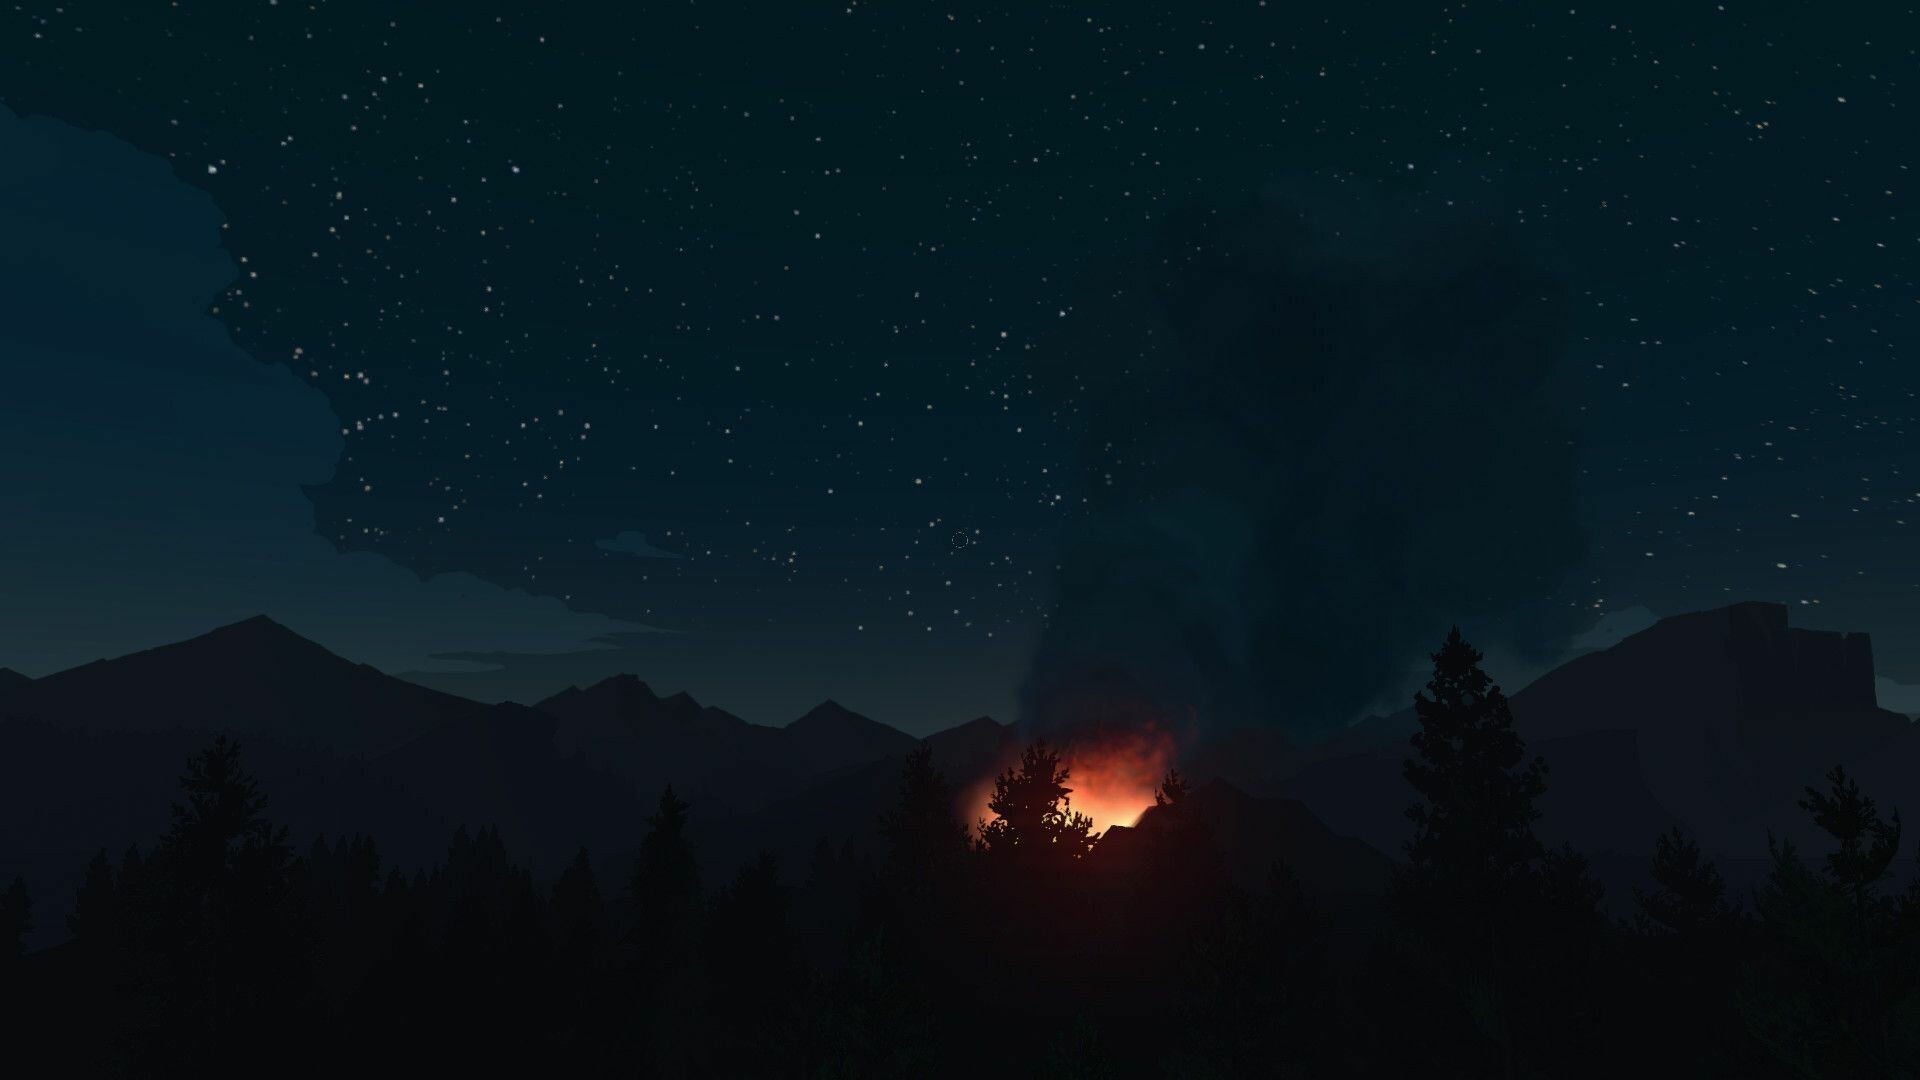 Firewatch: A story-driven adventure game that was developed by Campo Santo. 1920x1080 Full HD Wallpaper.